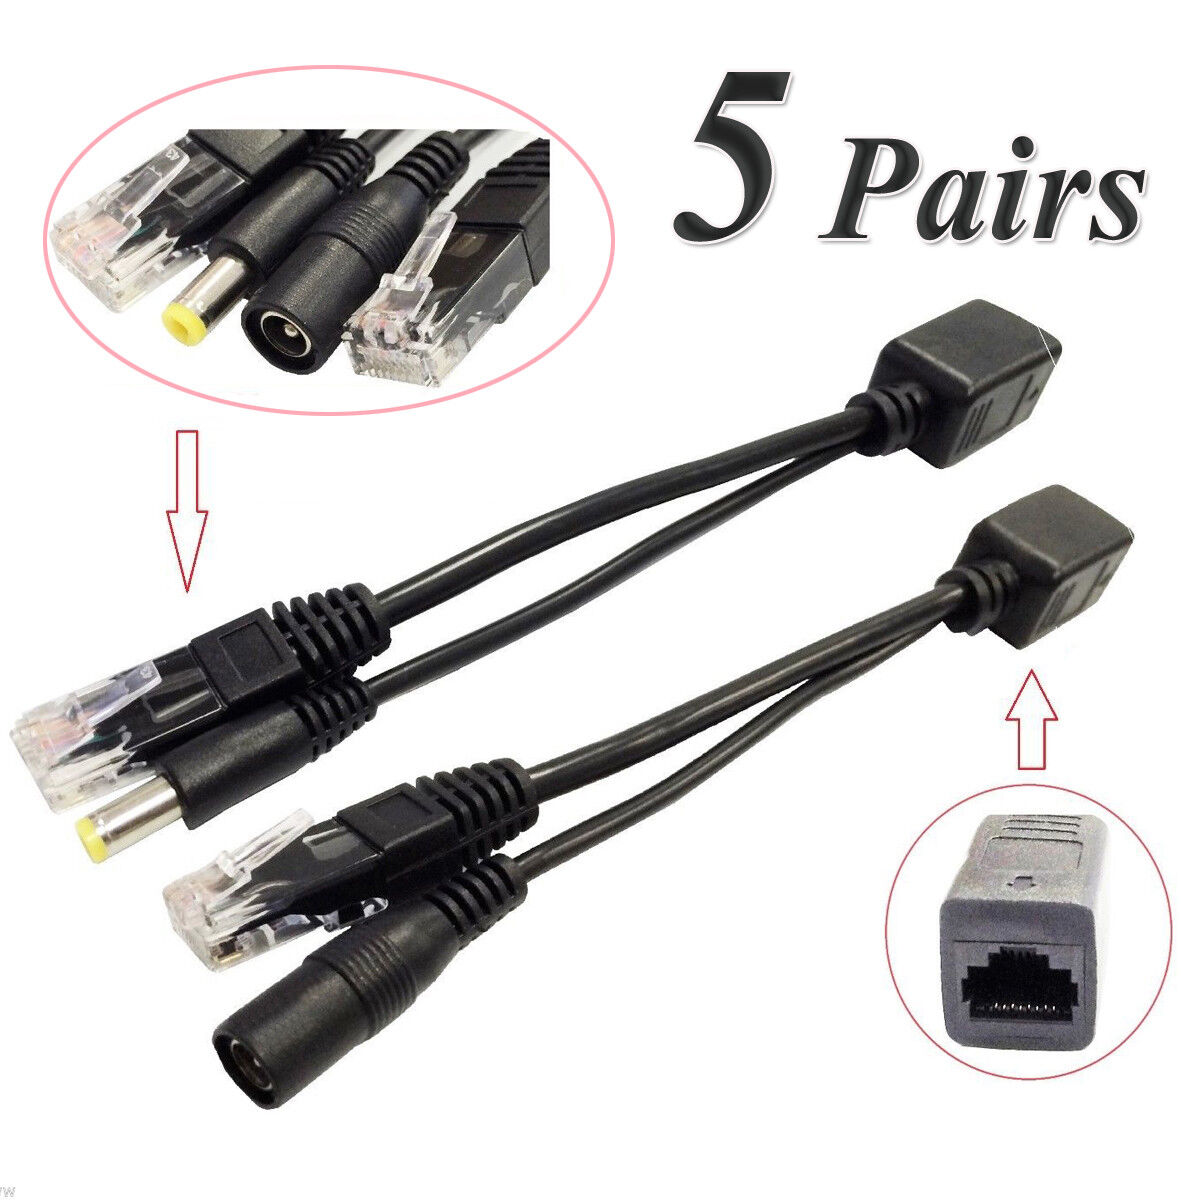 5 Set Pairs Power Over Ethernet Passive POE Injector Splitter Adapter Cable Kit